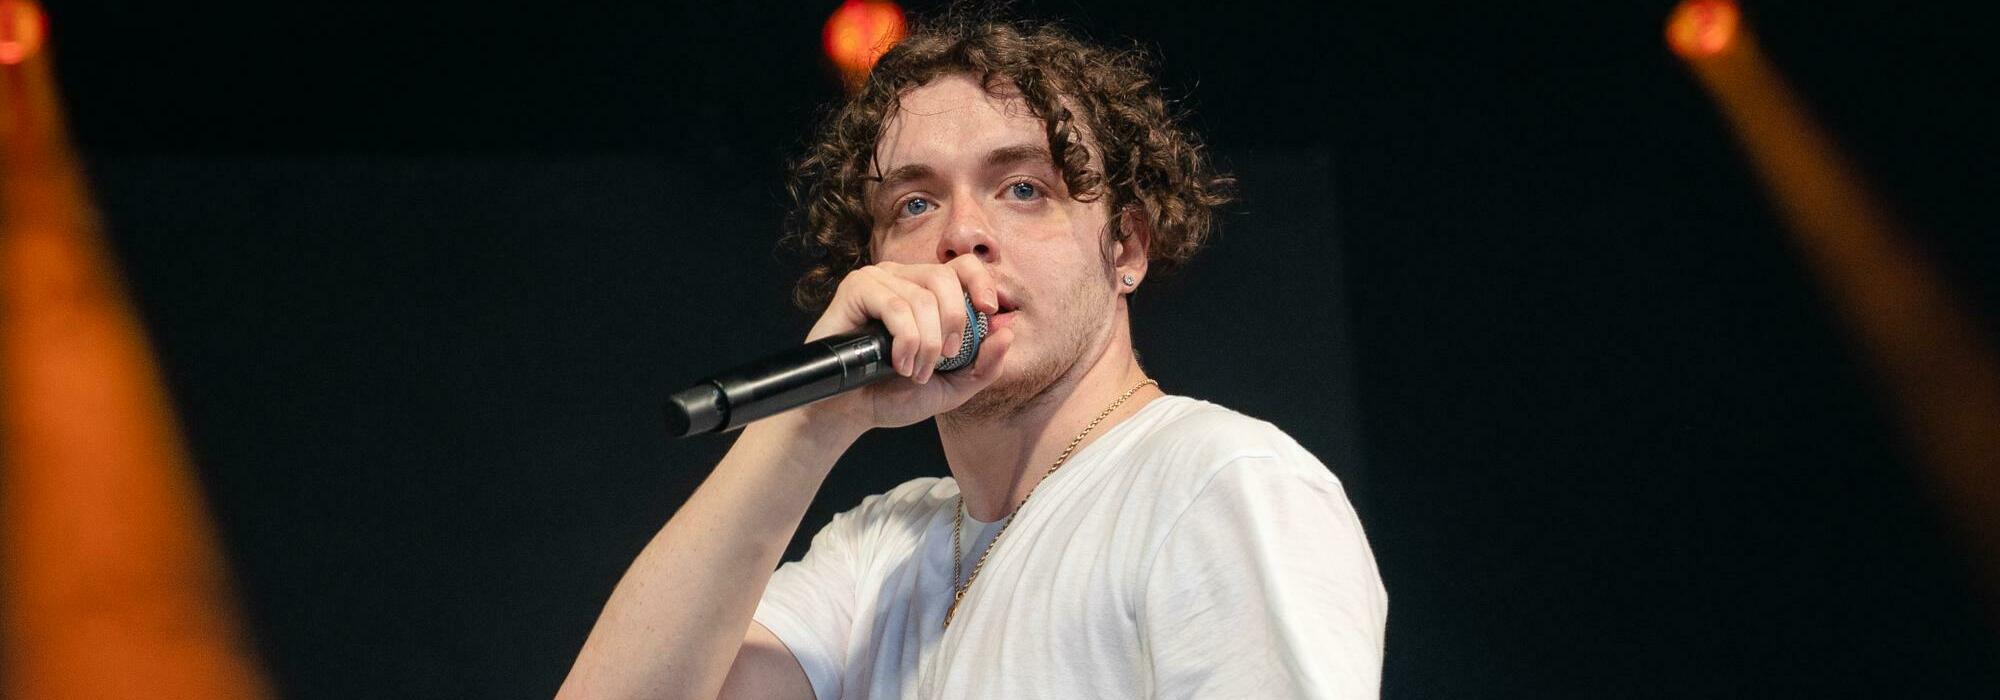 A Jack Harlow live event